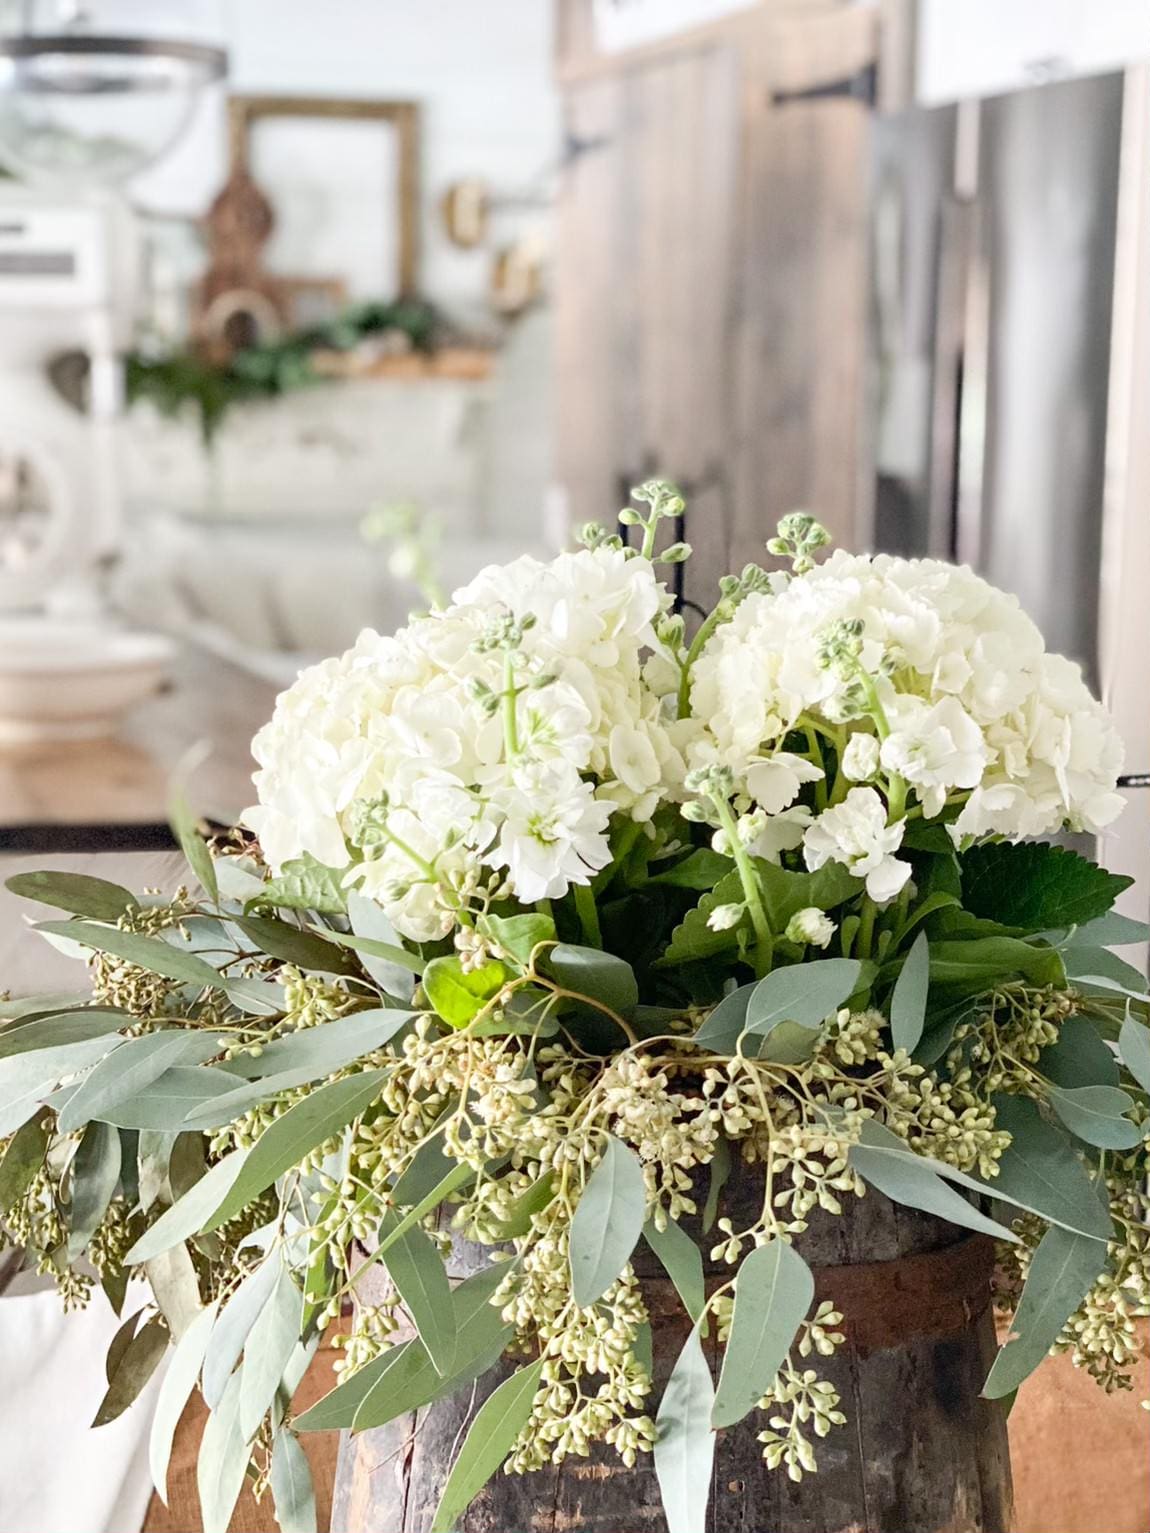 beautiful fresh white flowers arranged with fresh greenery in a cute pitcher